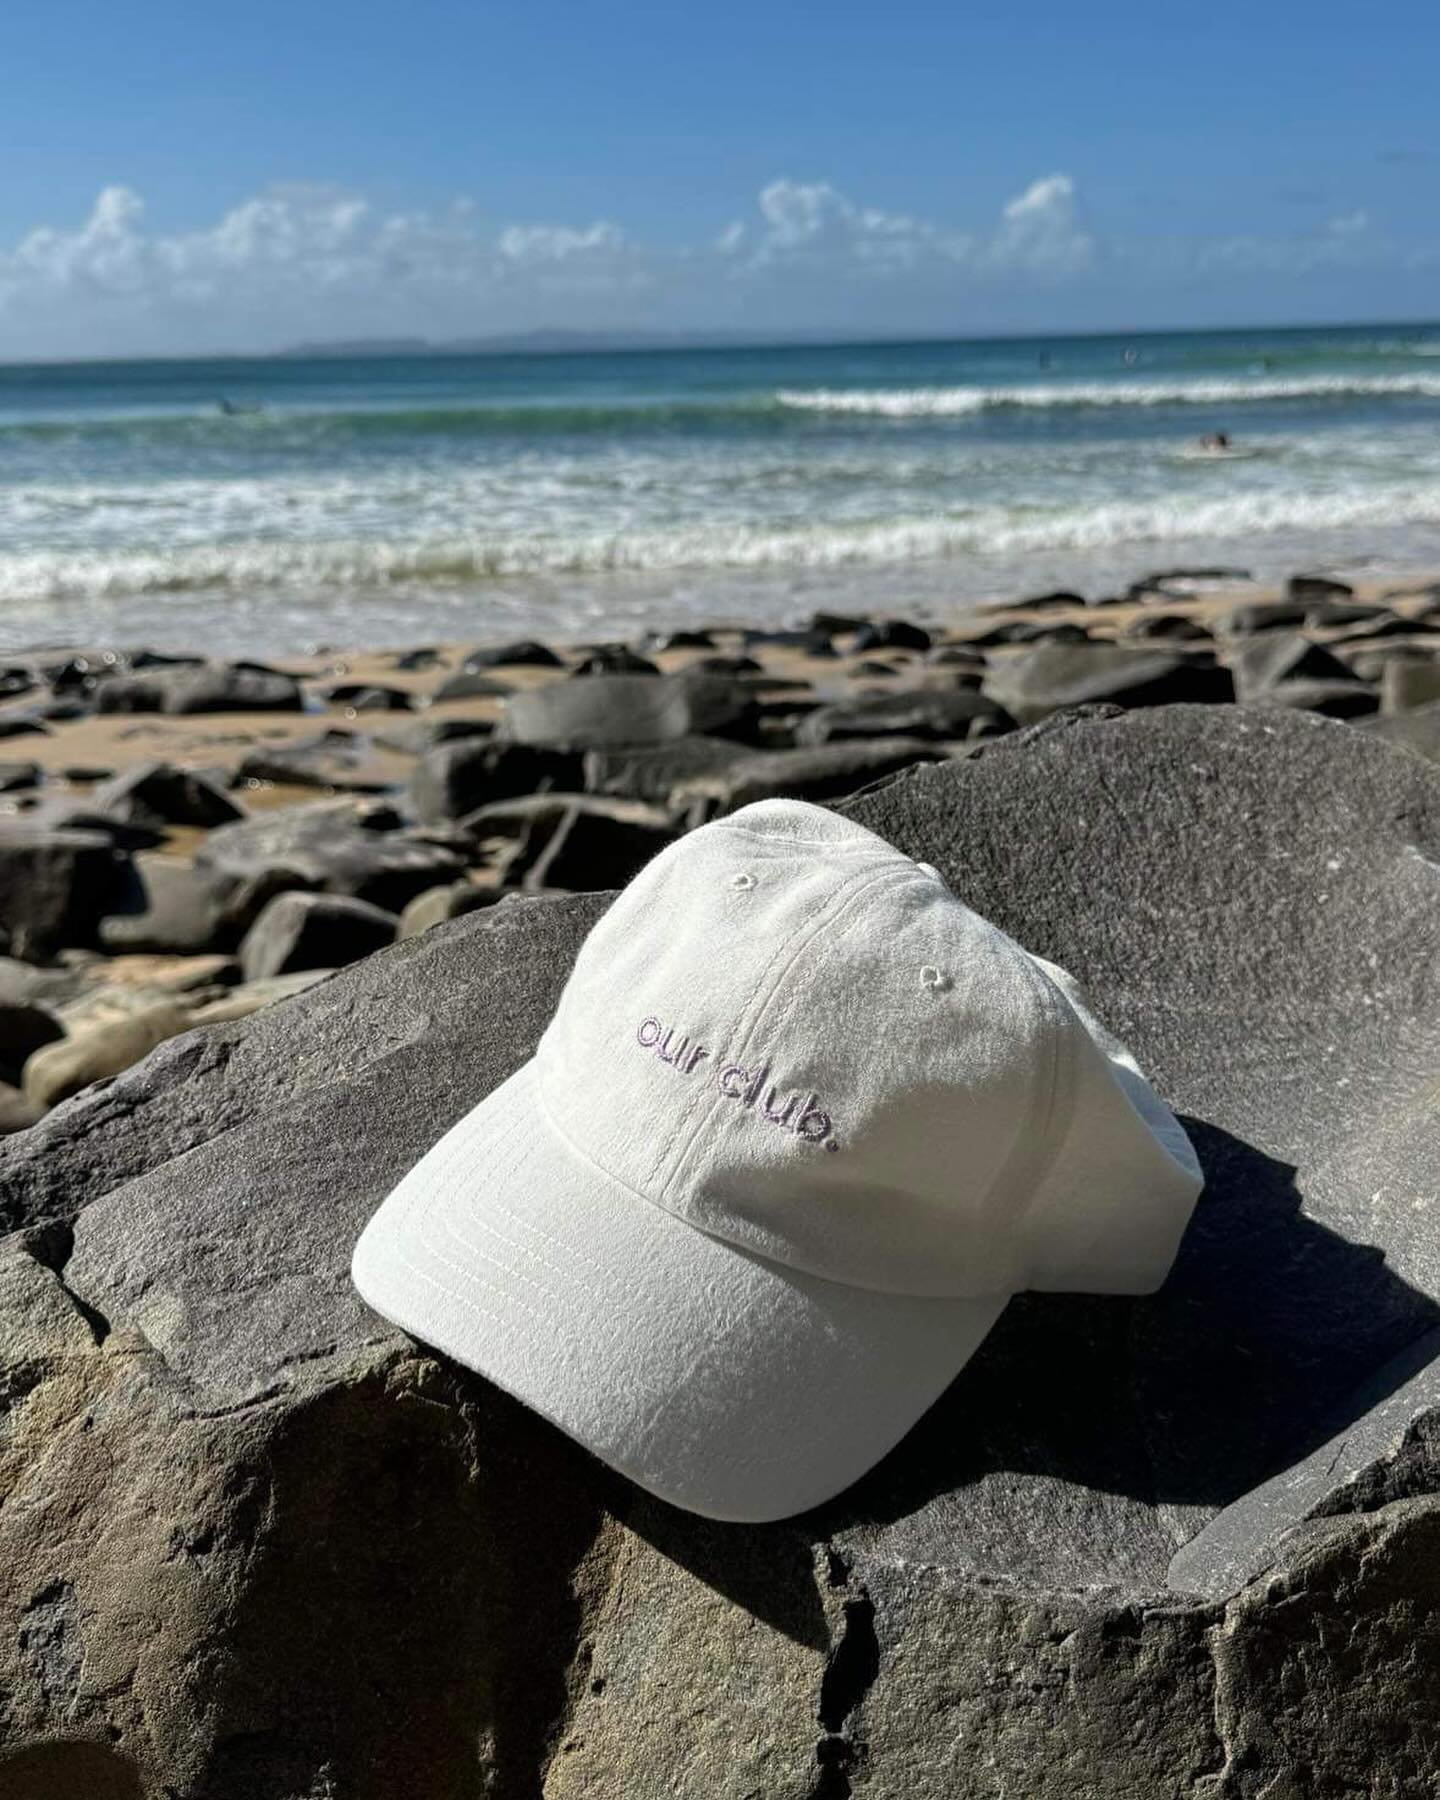 Top off your look with a splash of Violet Gin 🧢💜 Our classic cap in this stunning shade is all about vibes and versatility. Ready to add a pop of colour to your day? #VioletVibes #ClassicCap